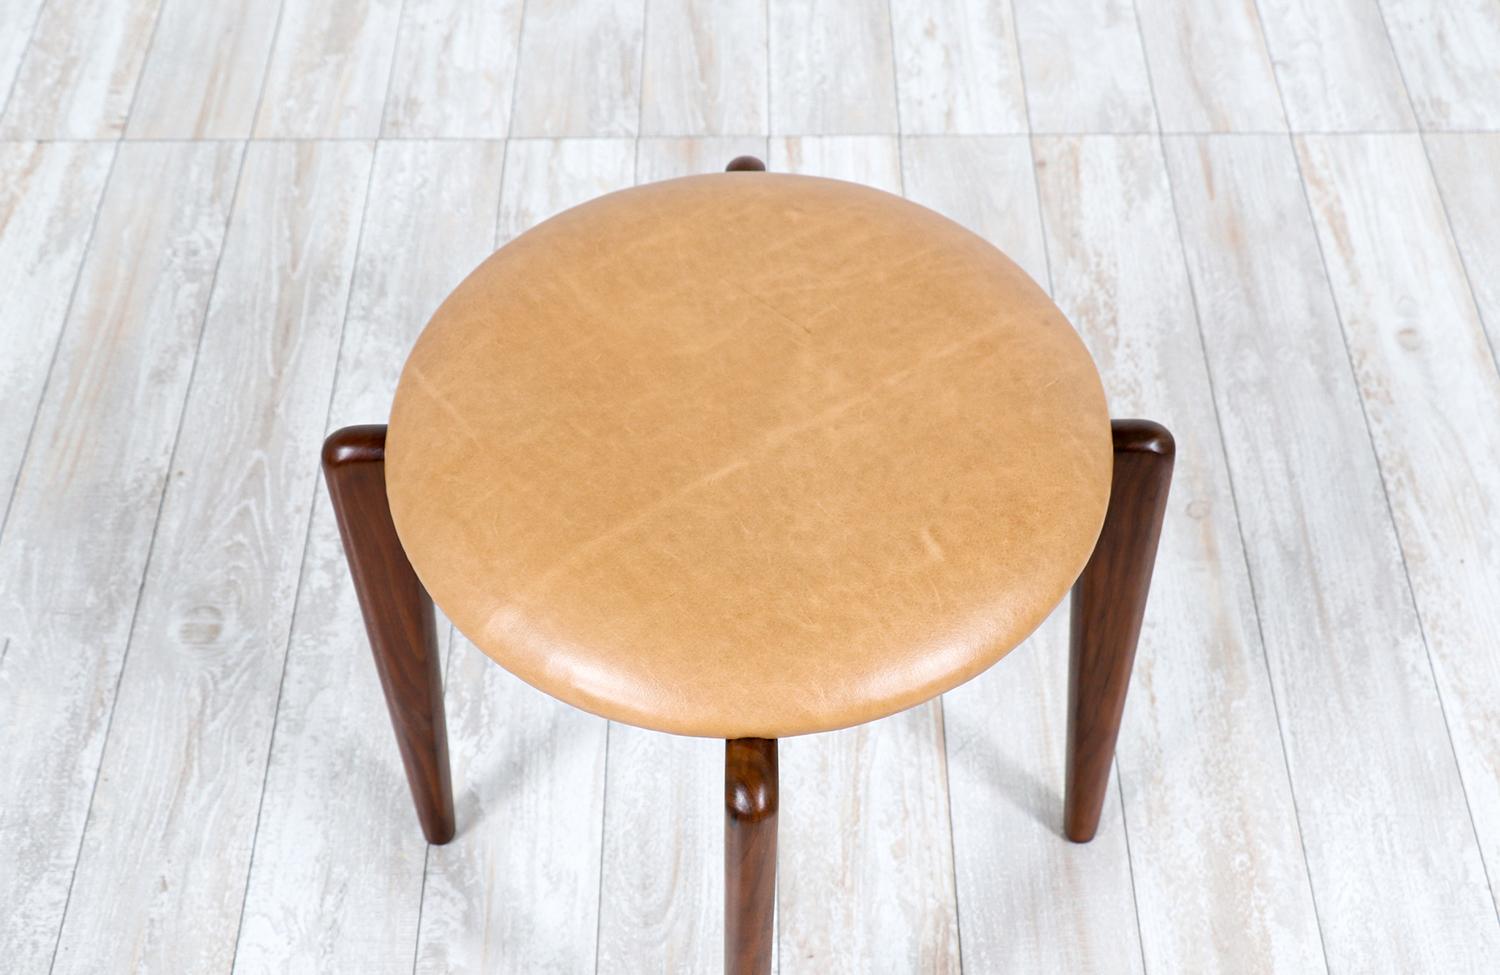 Mid-20th Century Adrian Pearsall Sculpted Walnut & Leather Stools for Craft Associates